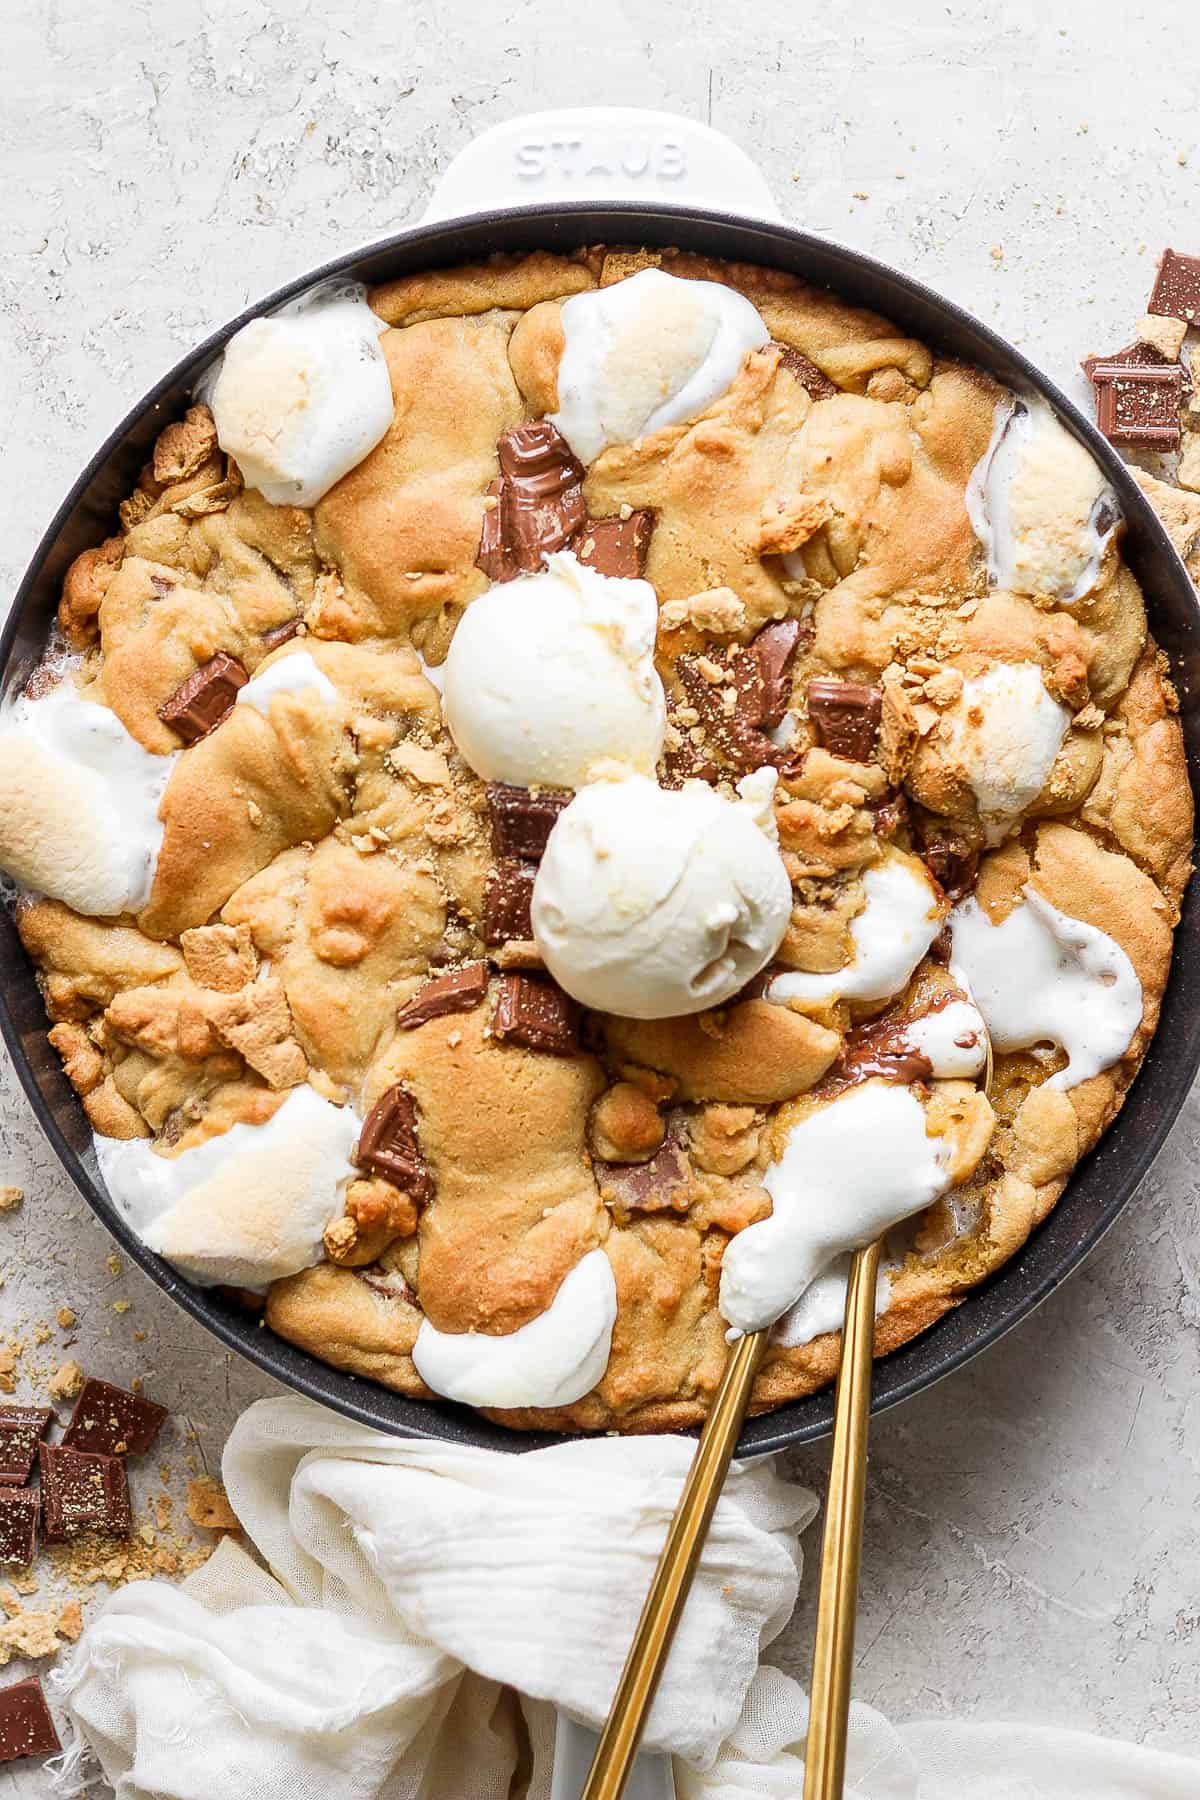 Scoops of vanilla ice cream added to the cookie skillet.